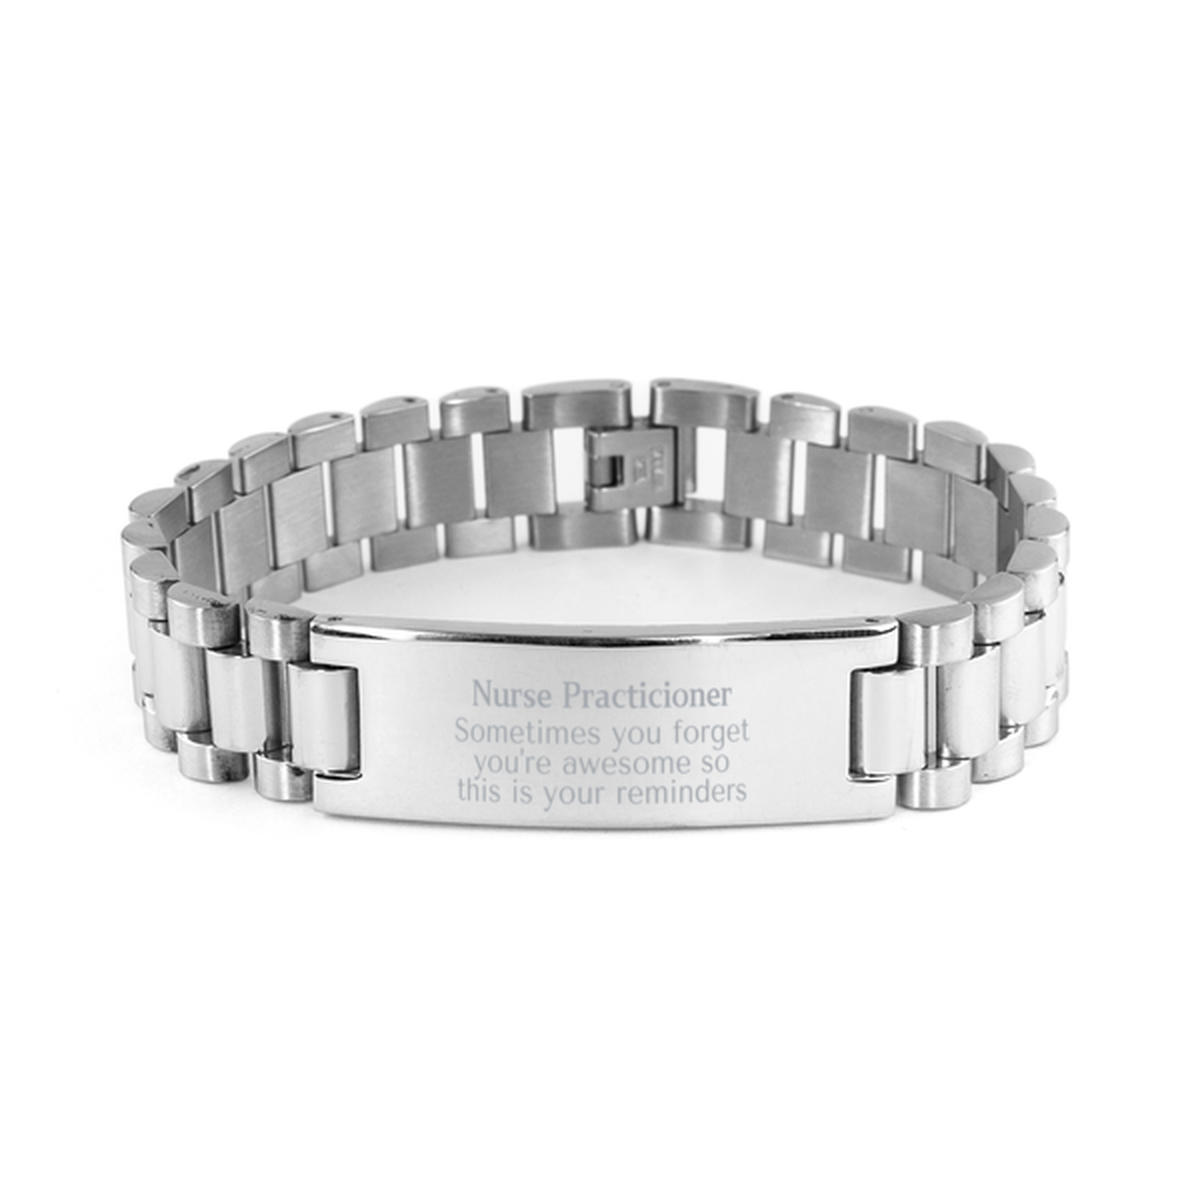 Sentimental Nurse Practicioner Ladder Stainless Steel Bracelet, Nurse Practicioner Sometimes you forget you're awesome so this is your reminders, Graduation Christmas Birthday Gifts for Nurse Practicioner, Men, Women, Coworkers